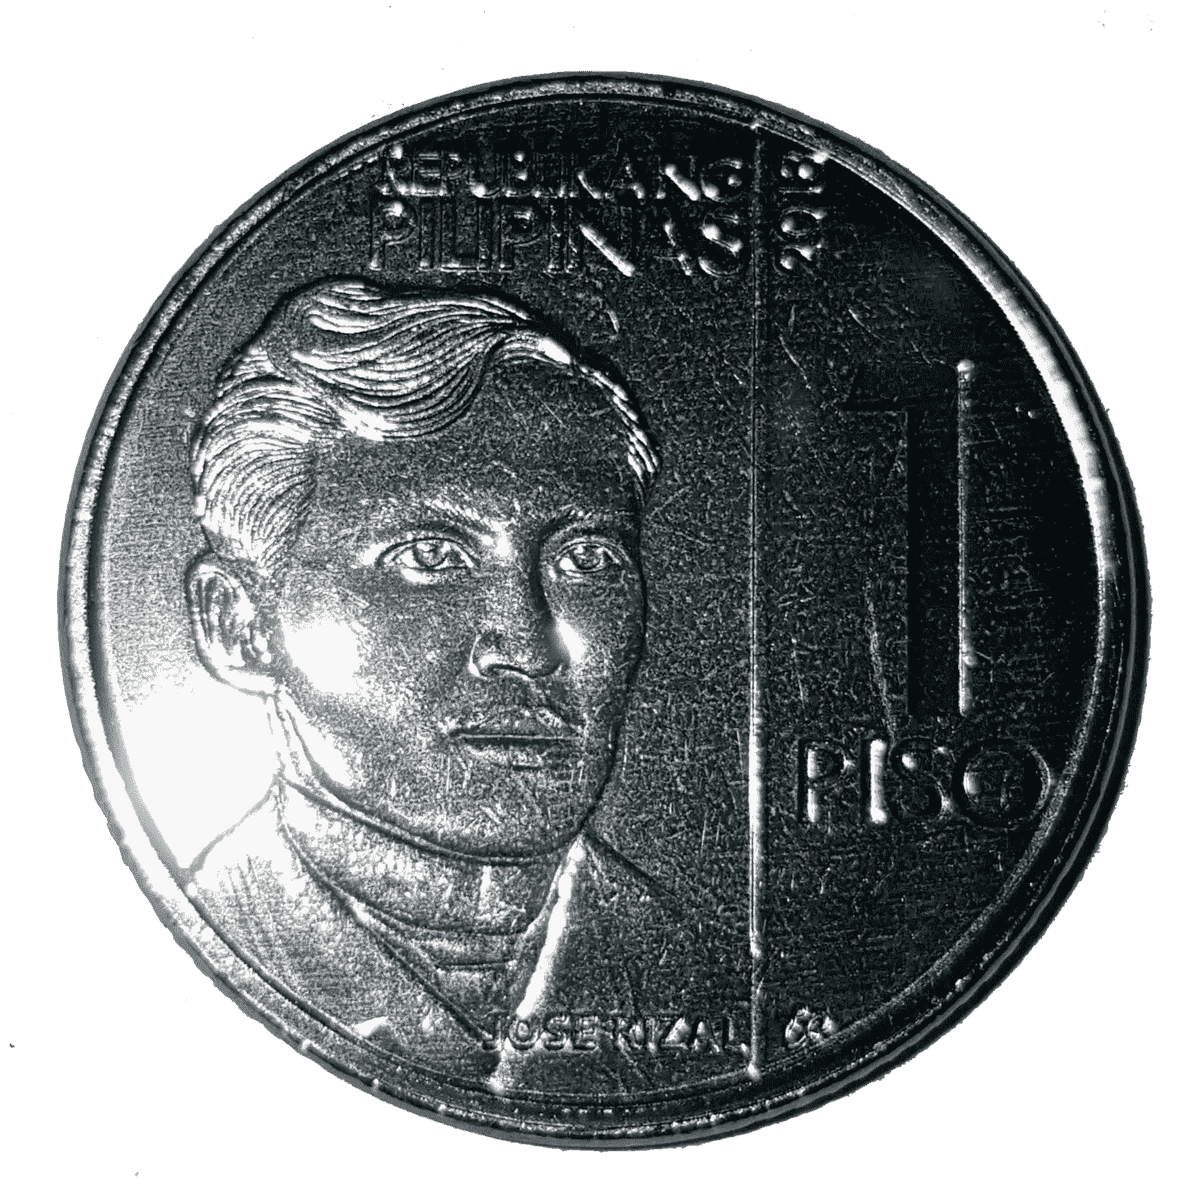 1200px-Philippines_New_Generation_1_peso_coin_obverse.png